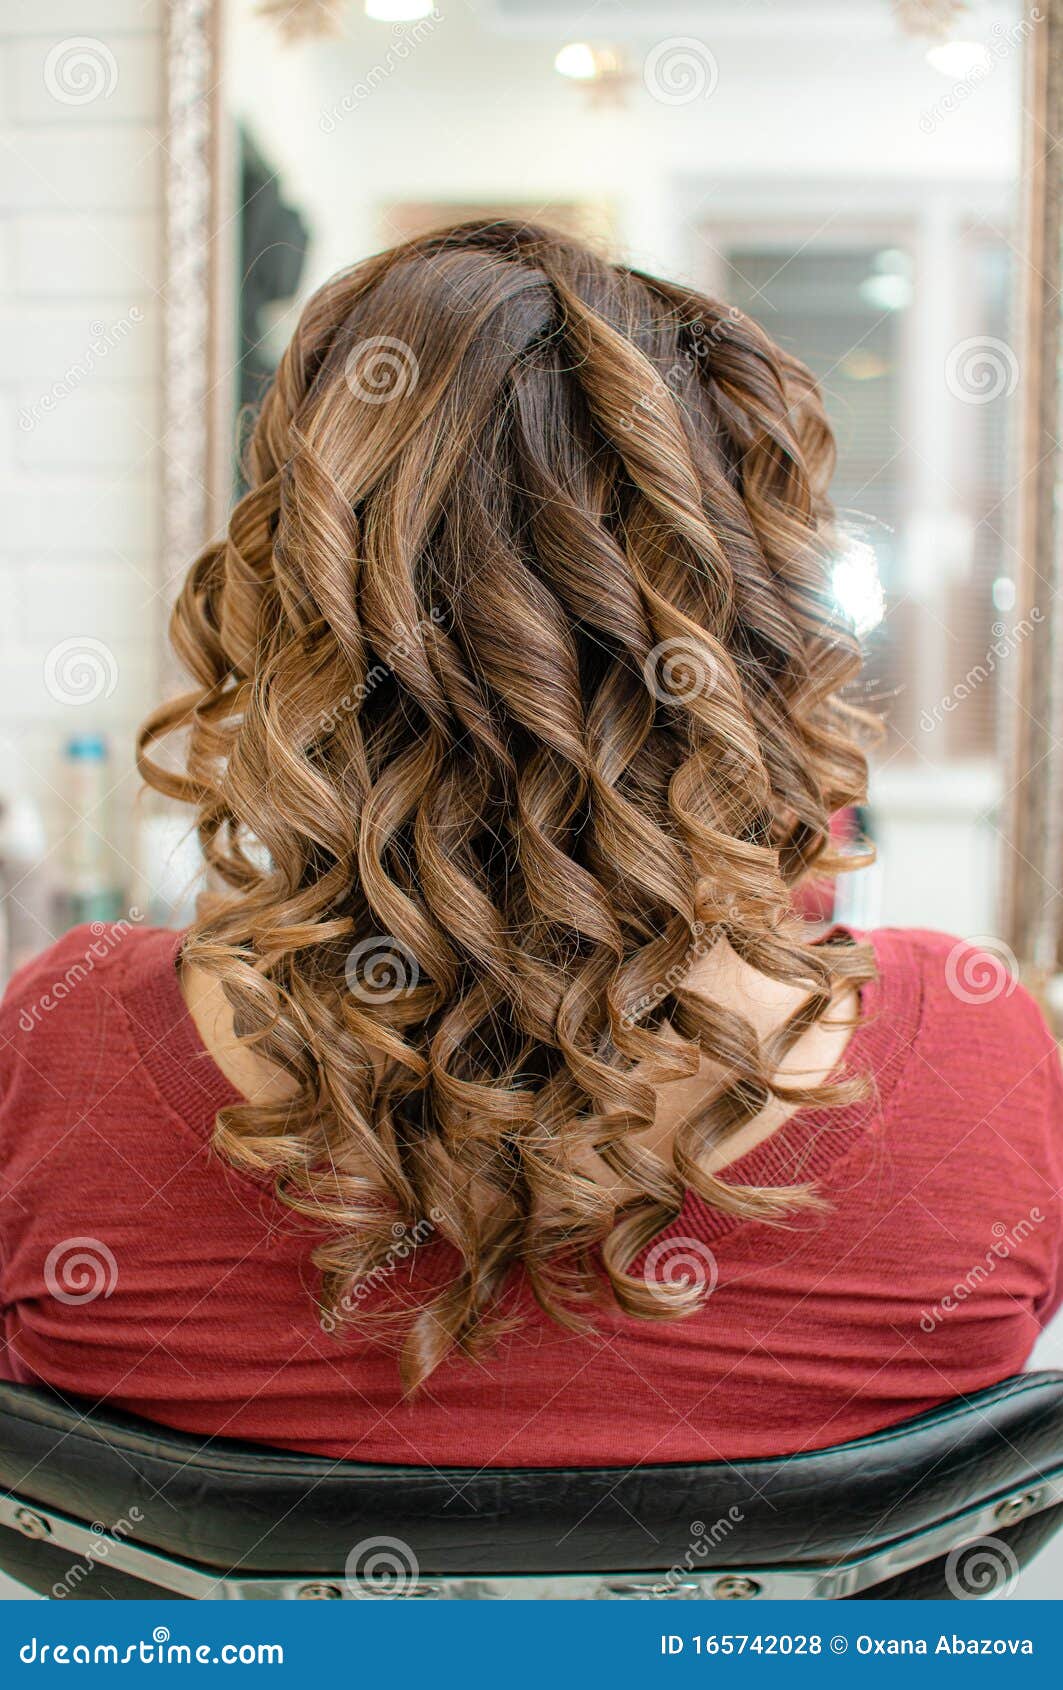 Process of Creating a Female Hairstyle on Long Hair Hollywood Wave View  from the Back Stock Photo - Image of curls, hairstyle: 165742028